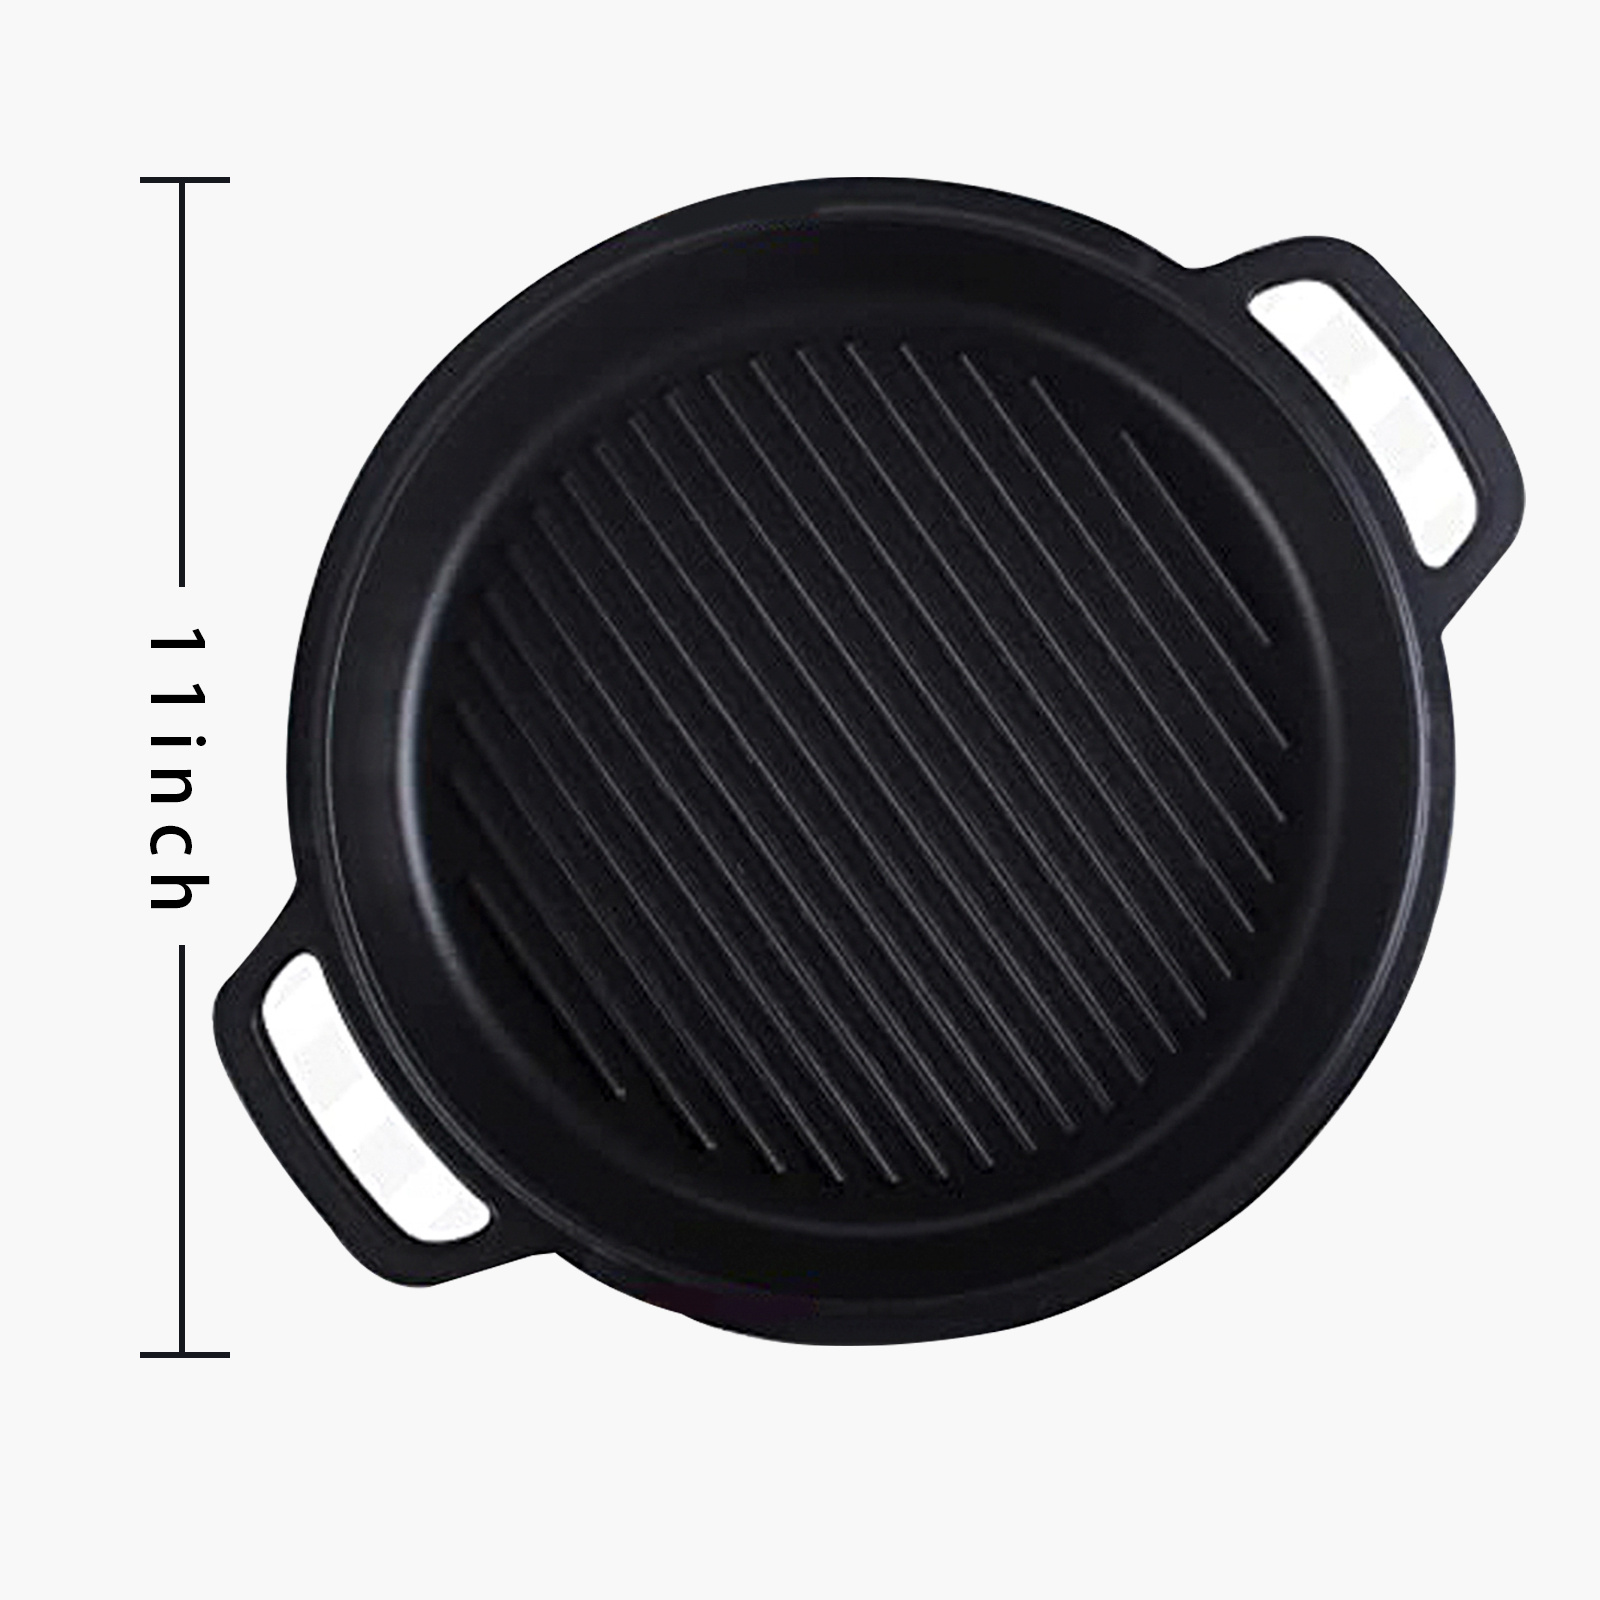 Cast Aluminum Griddle Pan for Stovetop with Lid - Lighter than Cast Iron  Skillet